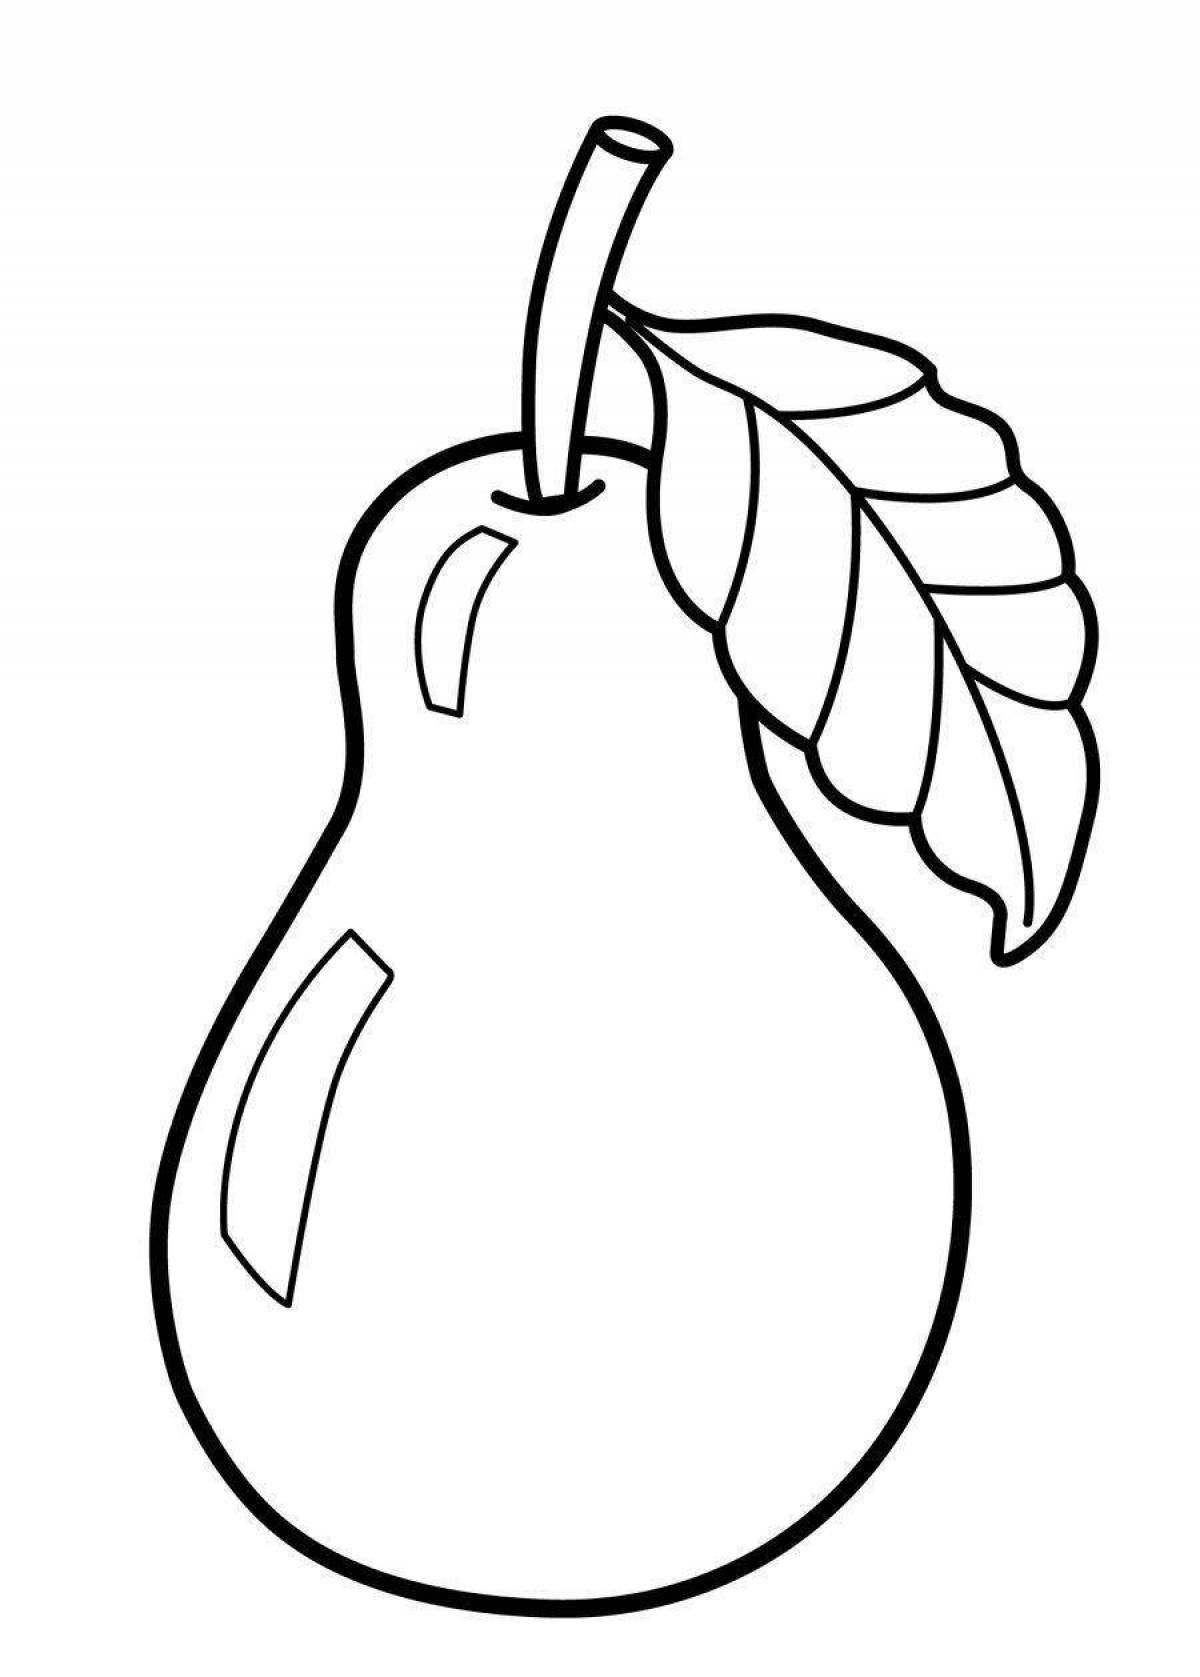 Great apple pear coloring page